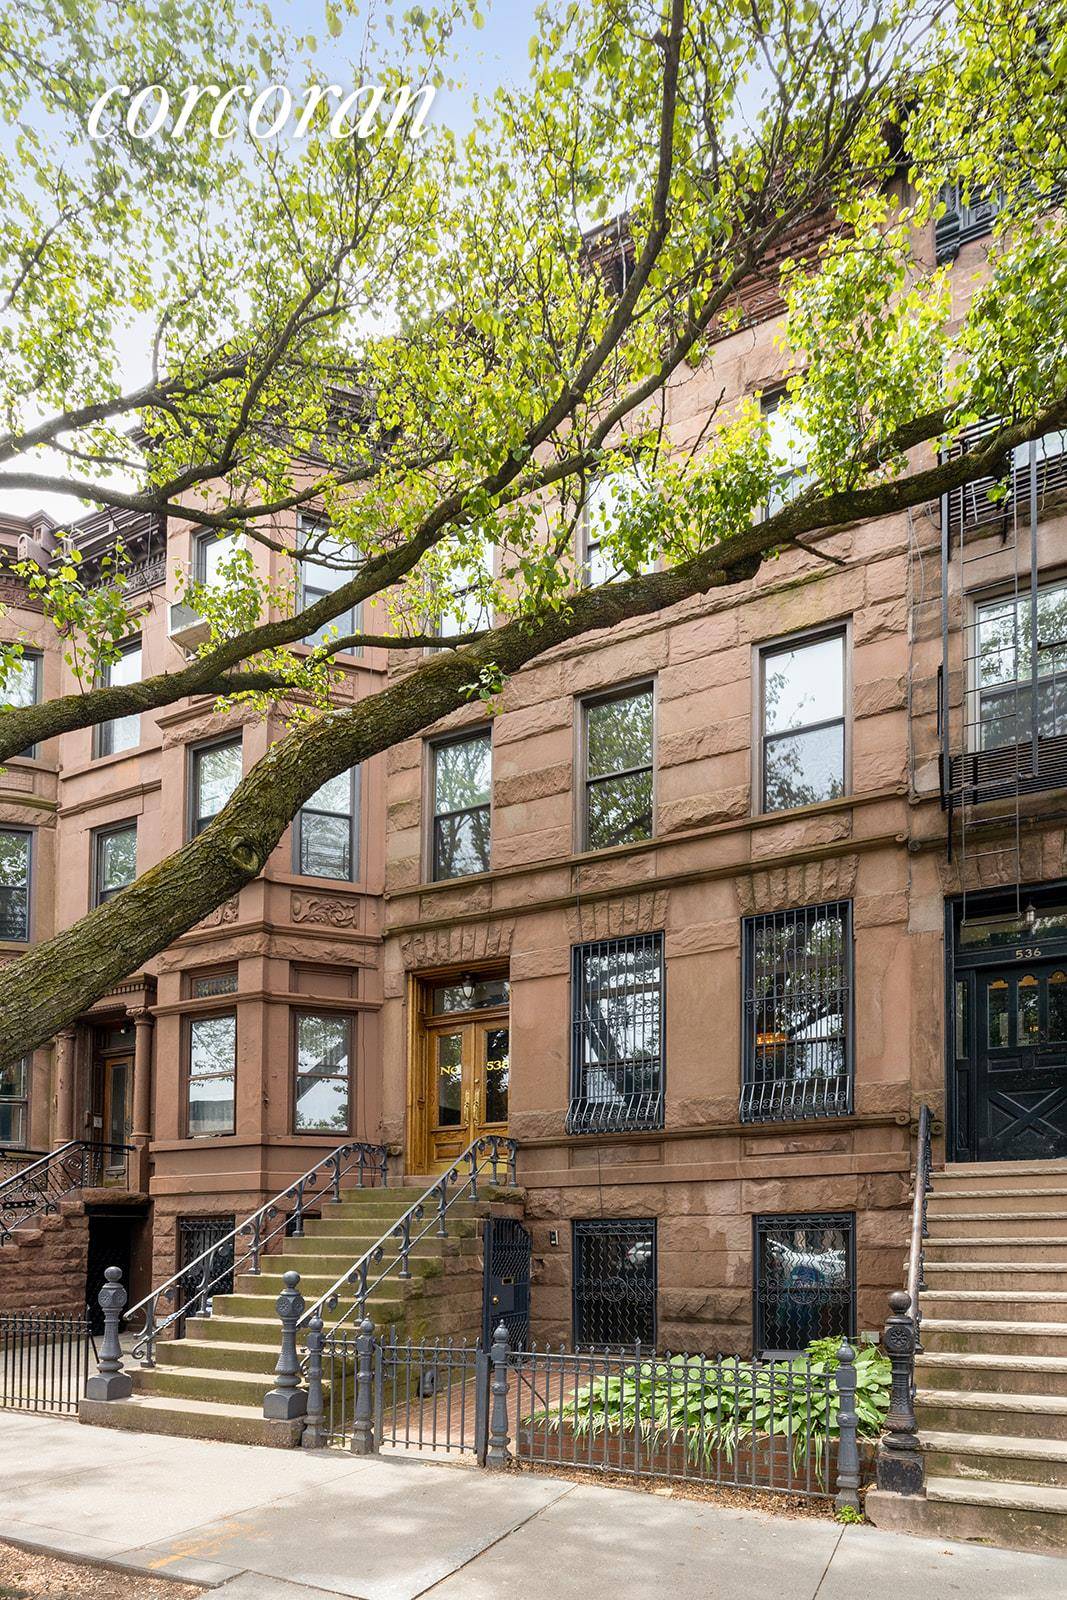 538 9th Street is a classically designed single family townhouse located half a block from Prospect Park, in the highly coveted Park Slope historic district.